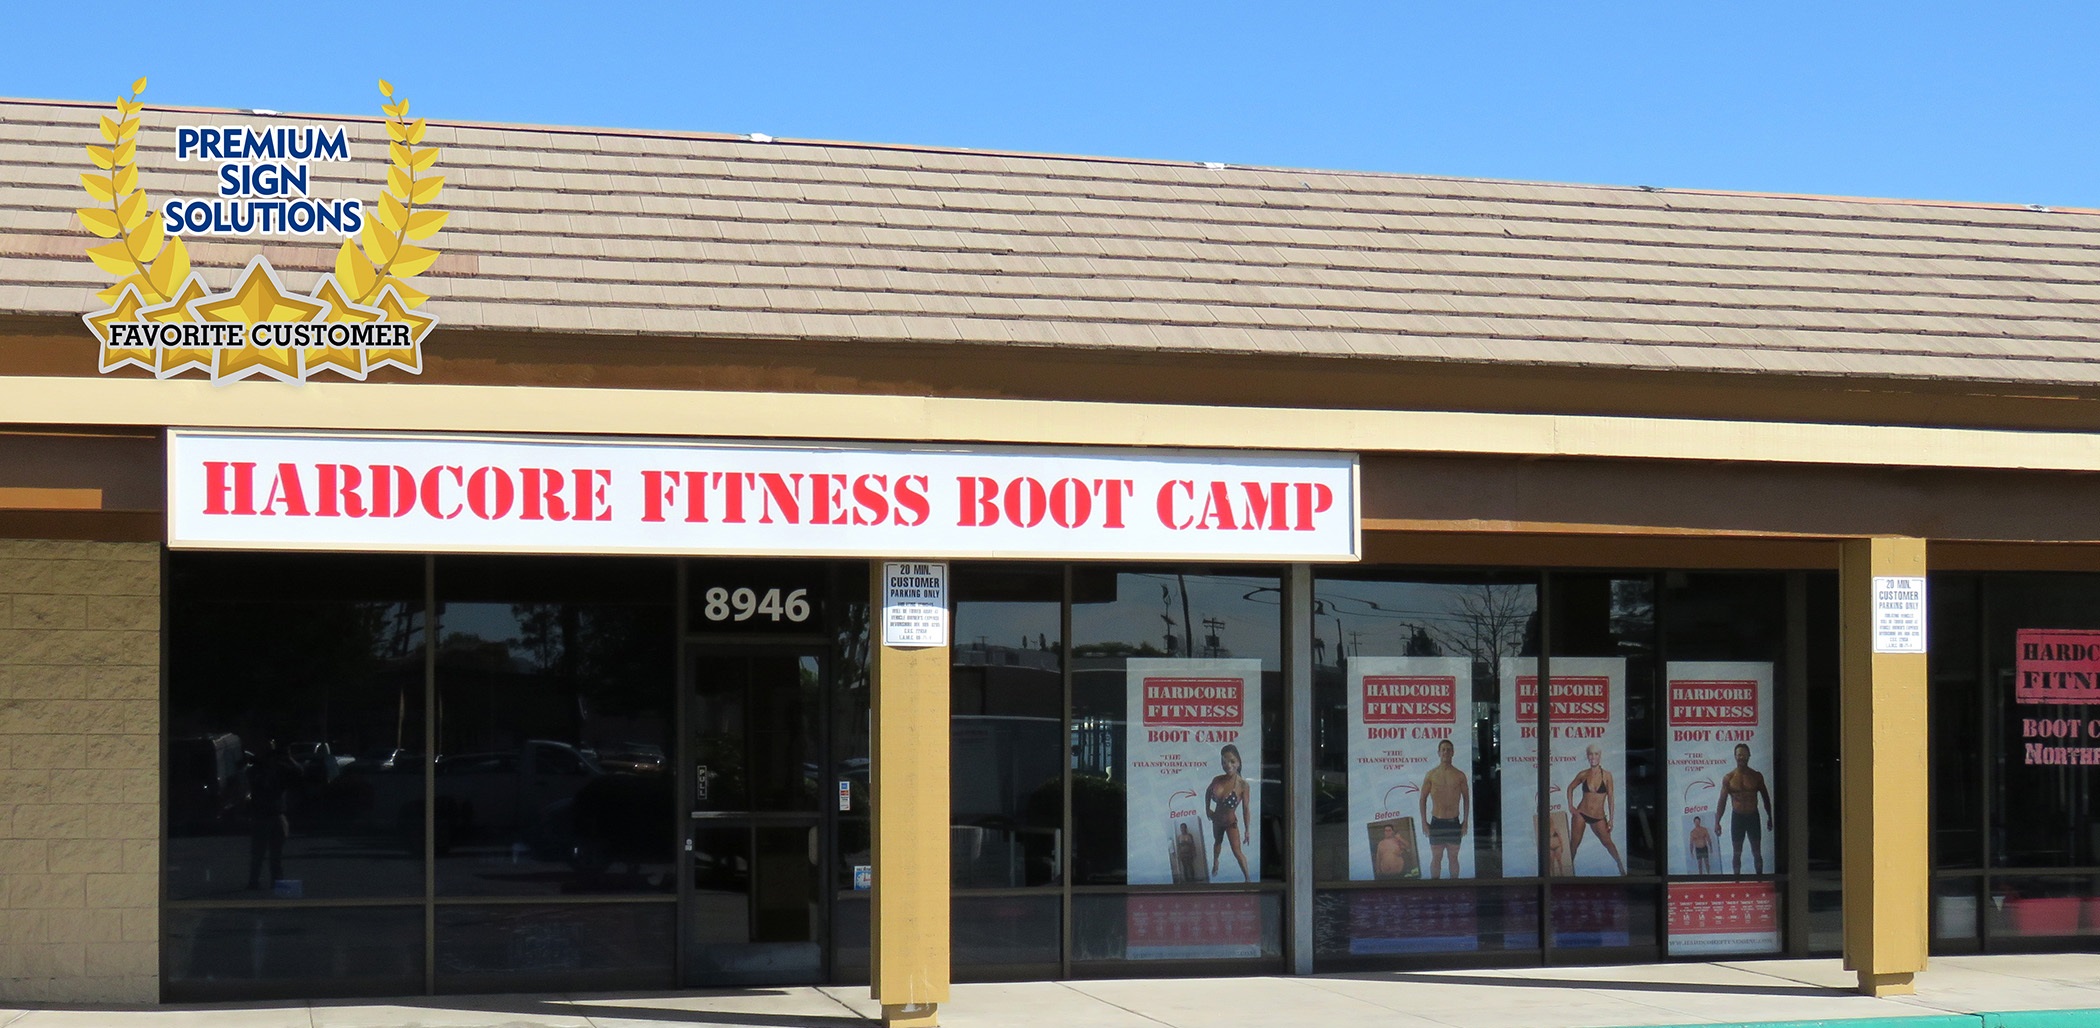 You are currently viewing Our Favorite Customers: Hardcore Fitness in Northridge